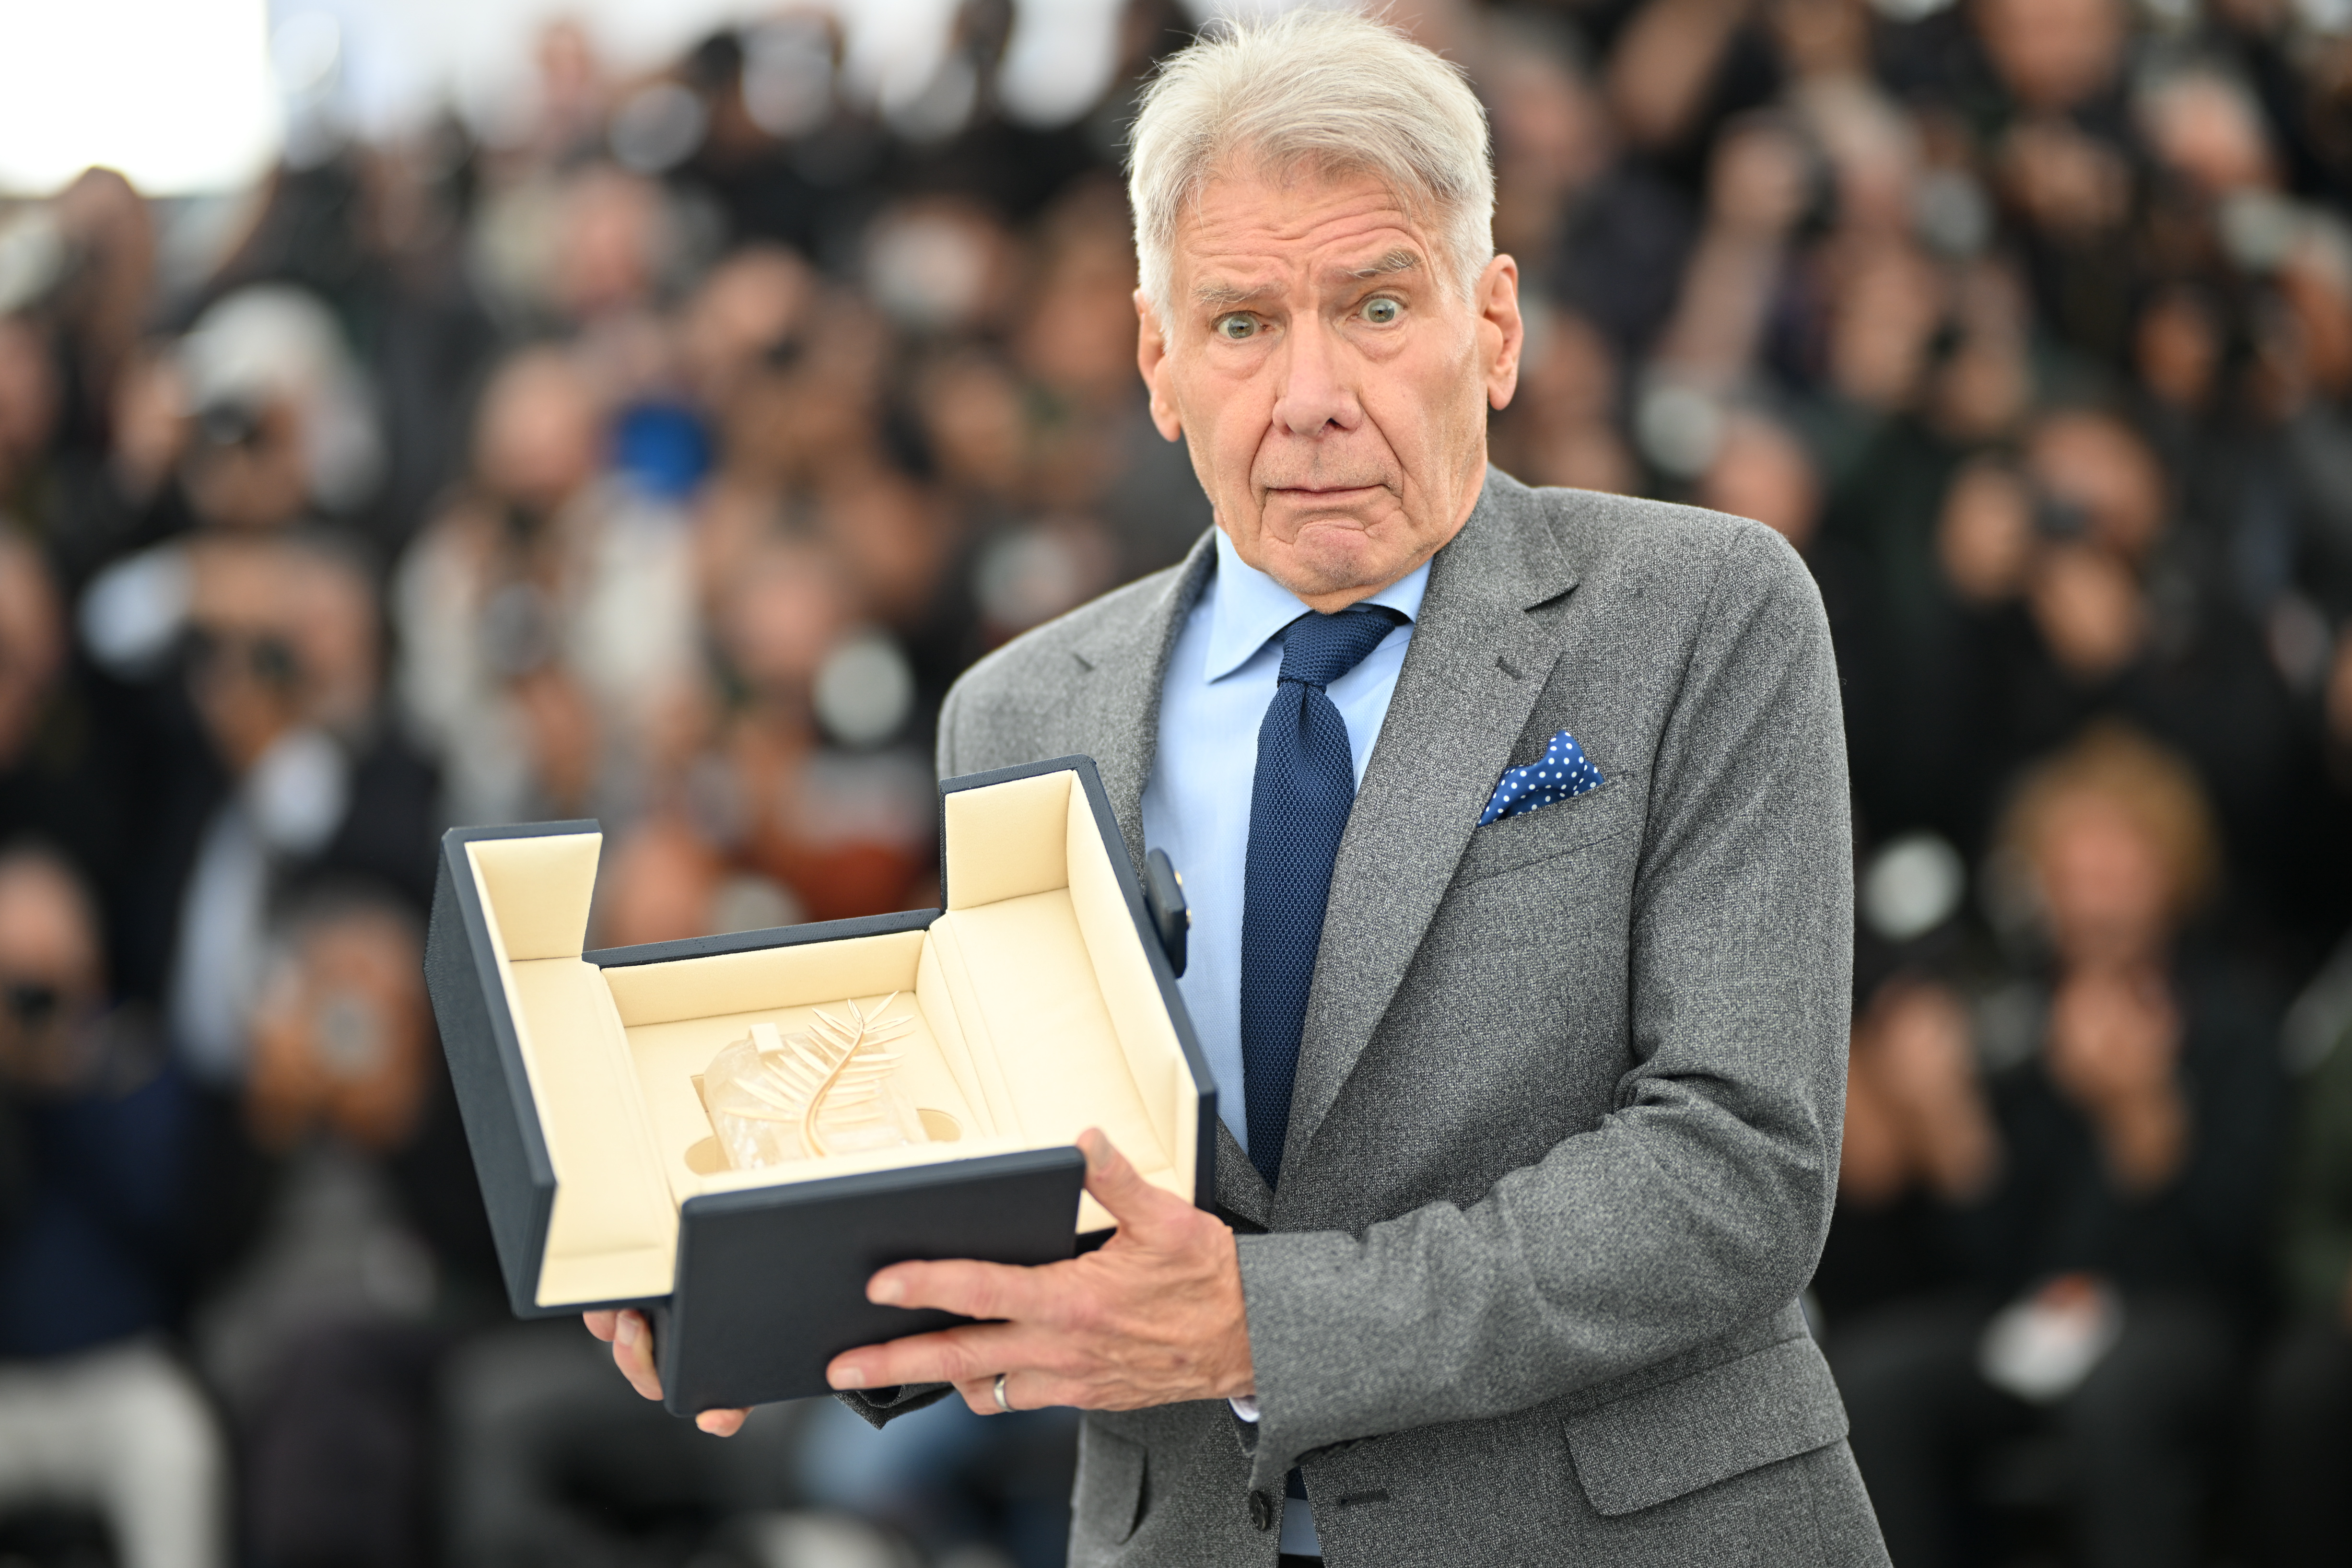 Harrison Ford shows the honorary Palme d'Or he received at the 76th annual Cannes film festival in Cannes, France on May 19, 2023| Source: Getty Images